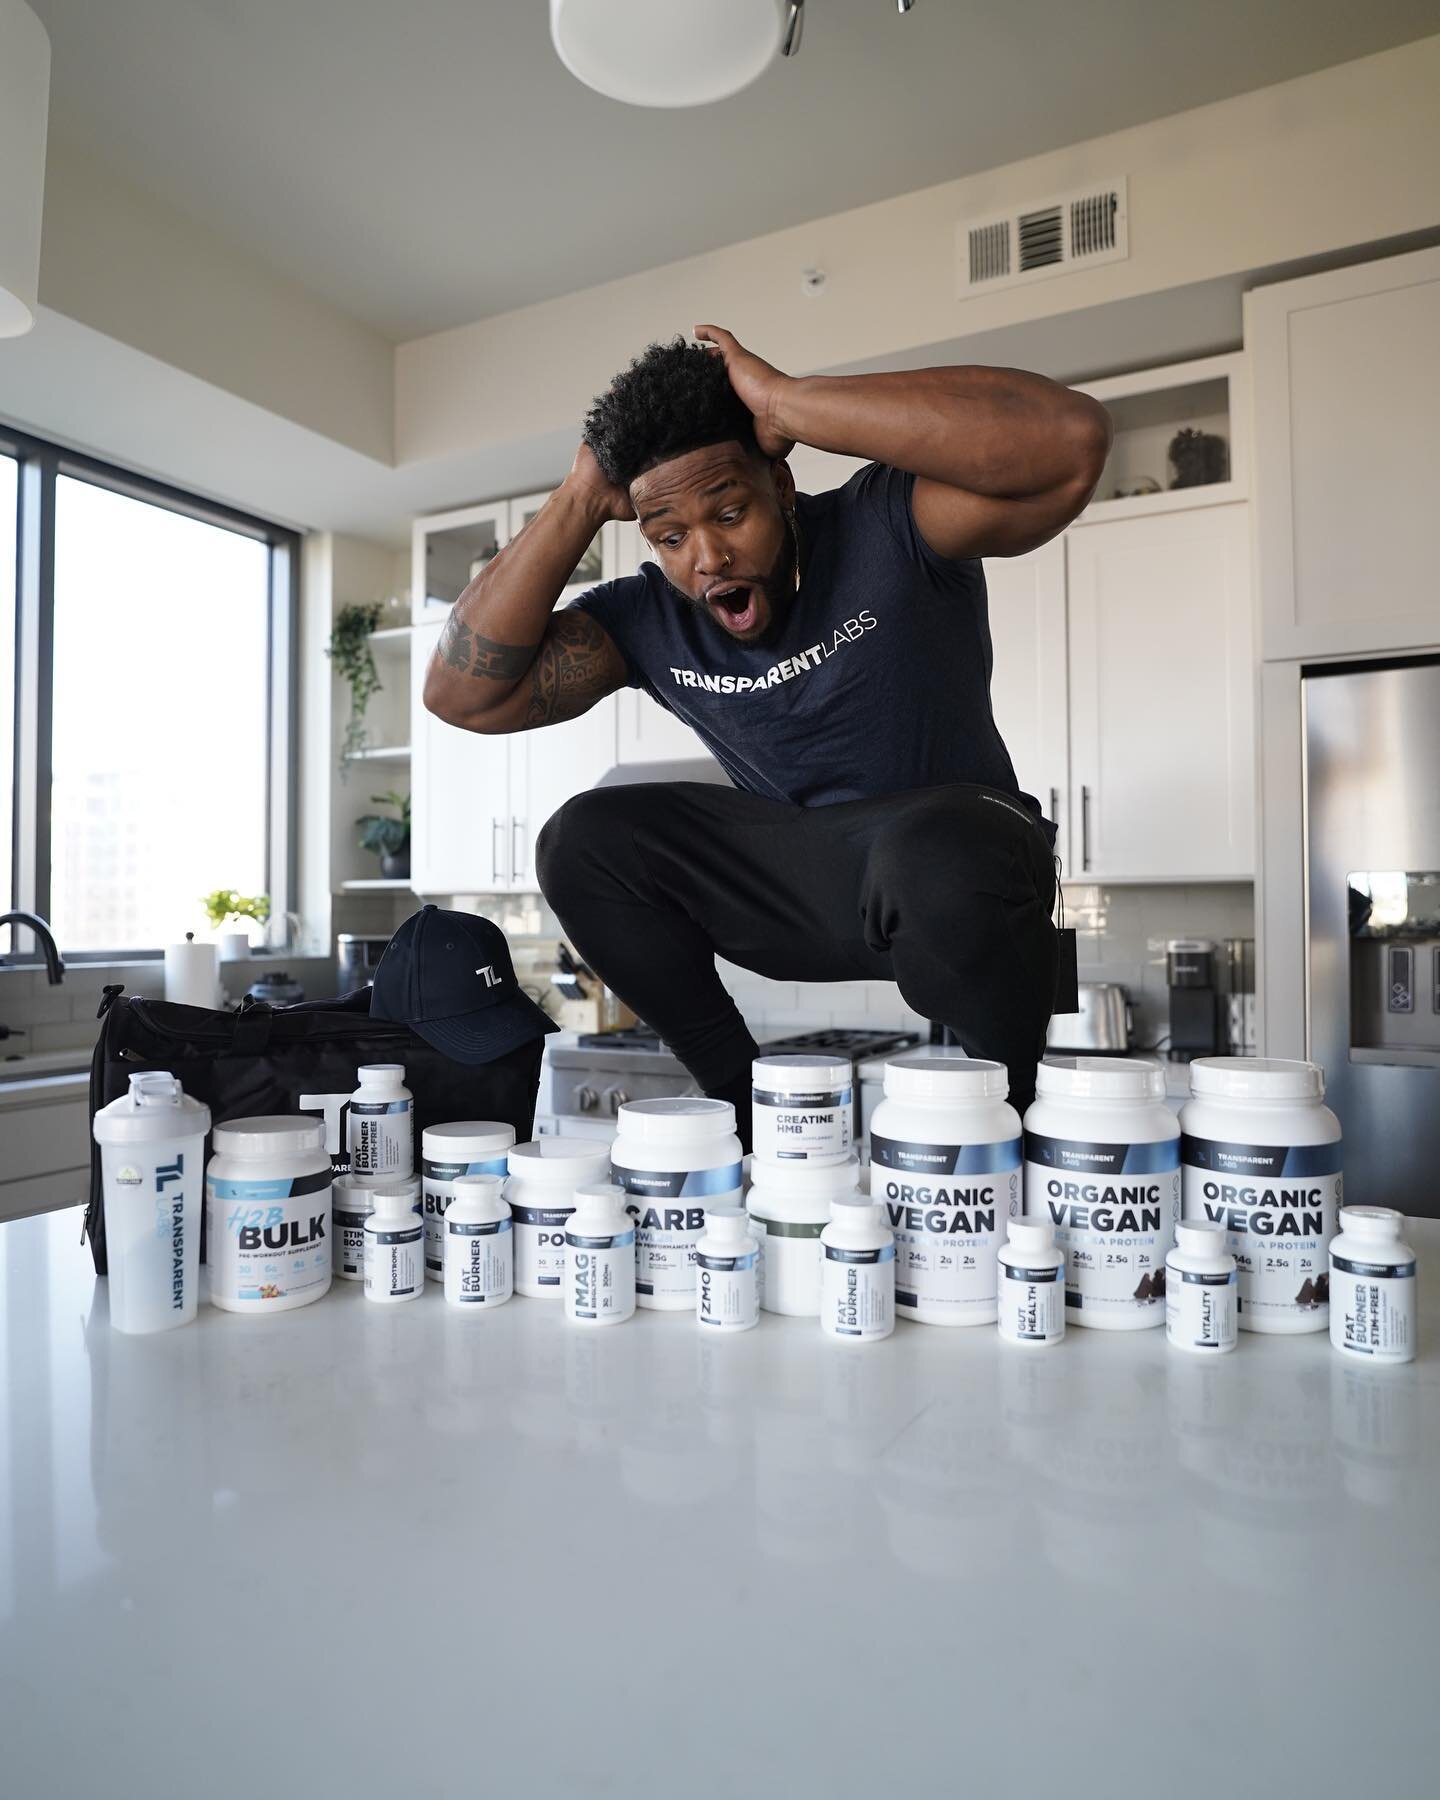 Who wants all these supplements? today I am announcing a Huge @transparentlabs labs giveaway in honor of our new partnership.  All you need to do is (below)
-
Follow @fbaftermath 
Follow @transparentlabs
Tag a friend and comment done (each tag will i